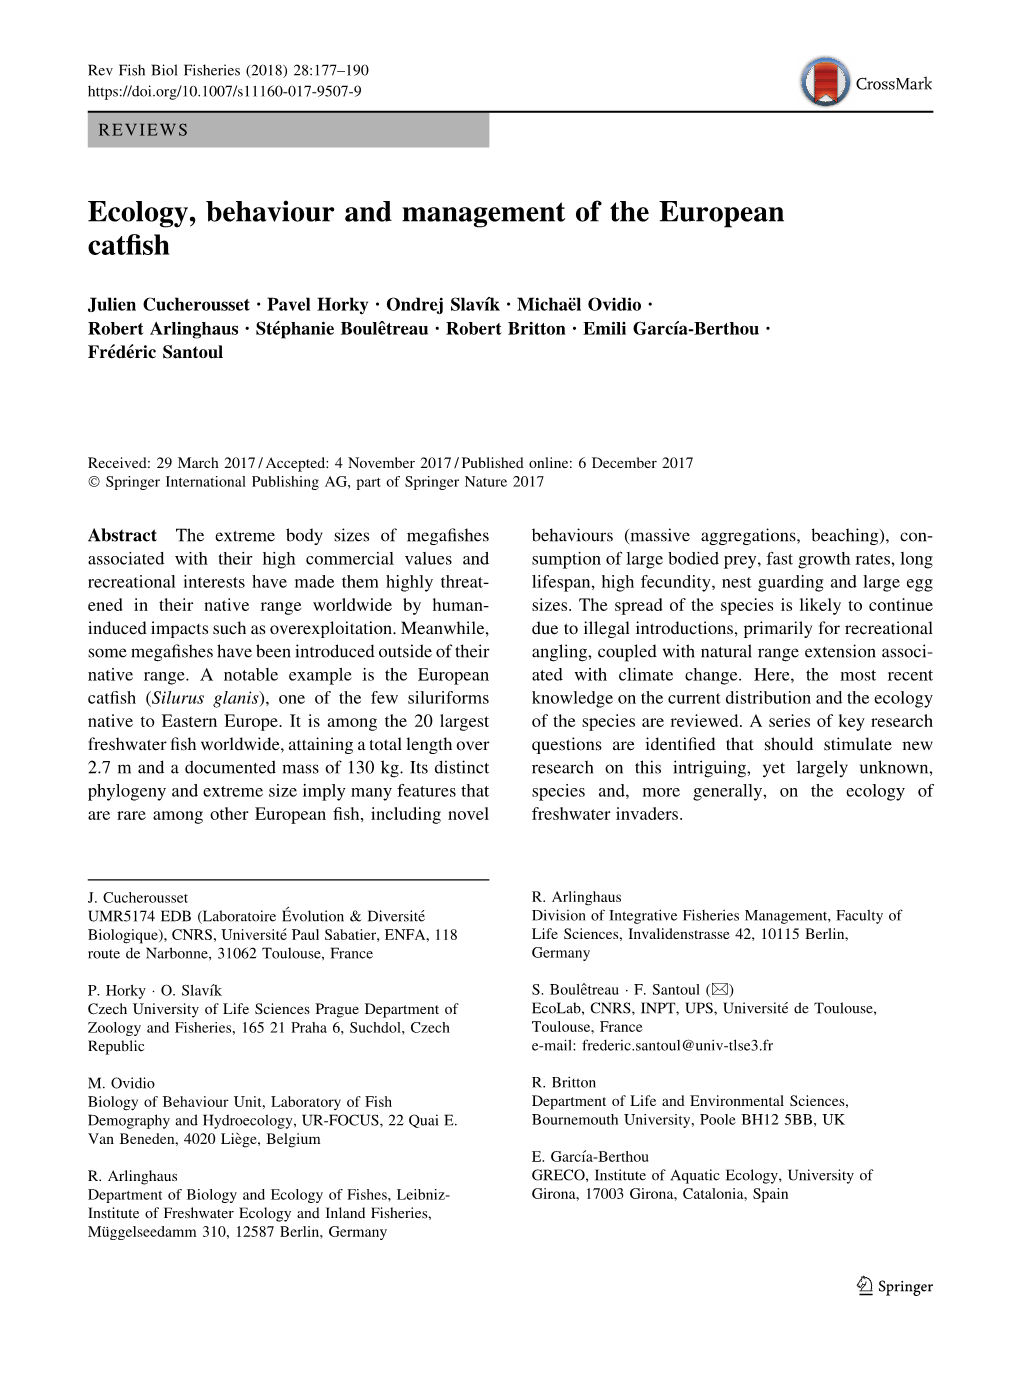 Ecology, Behaviour and Management of the European Catfish